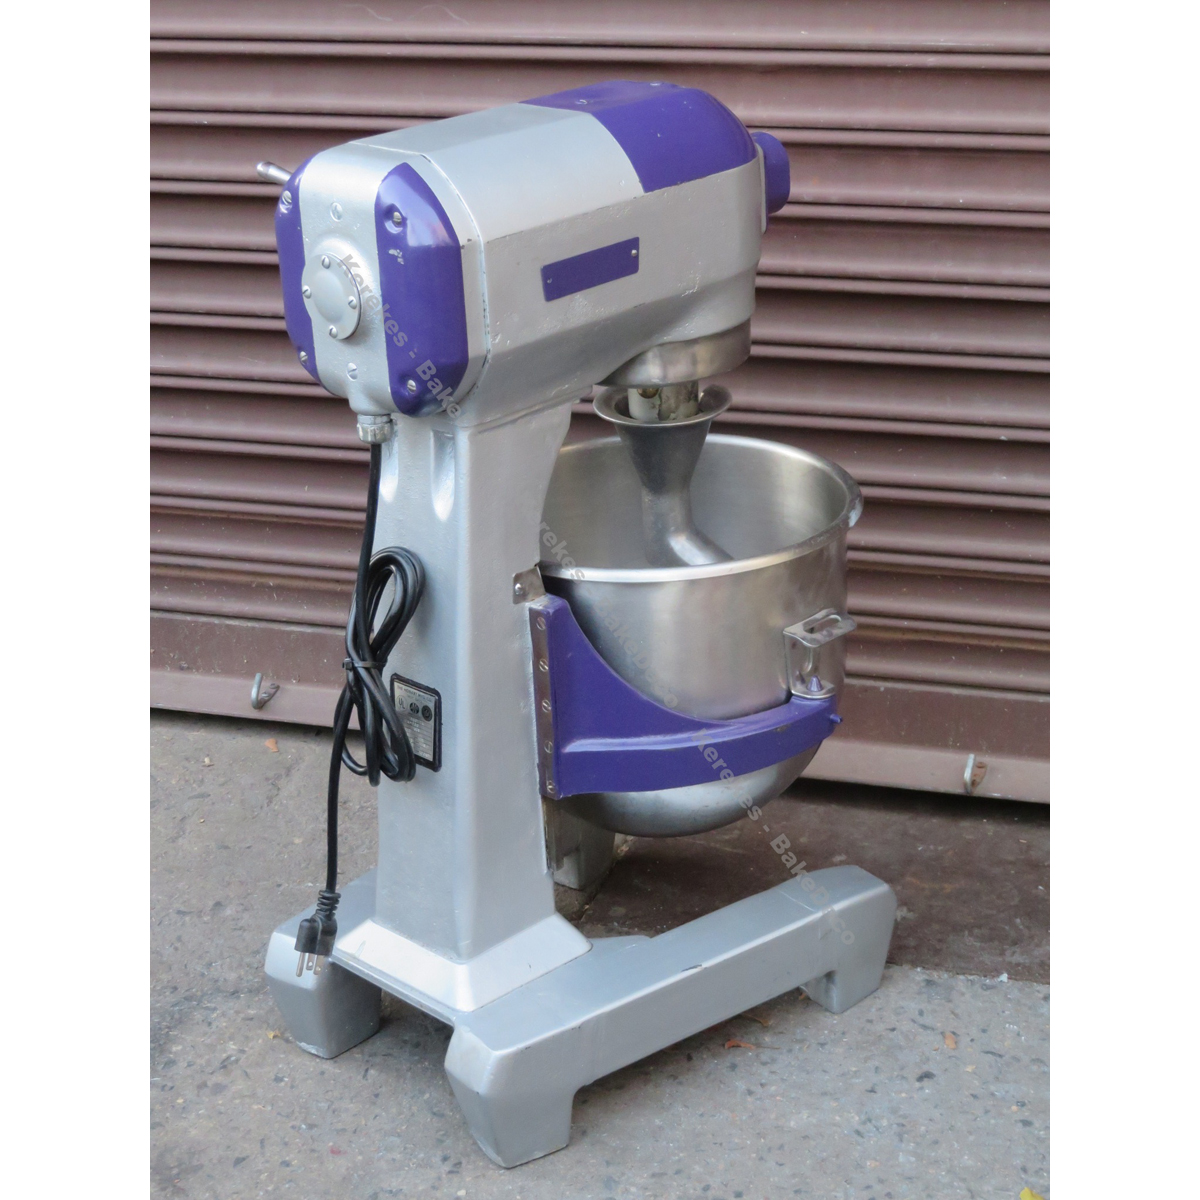 Hobart 20 Quart A200 Mixer, Used Excellent Condition image 2